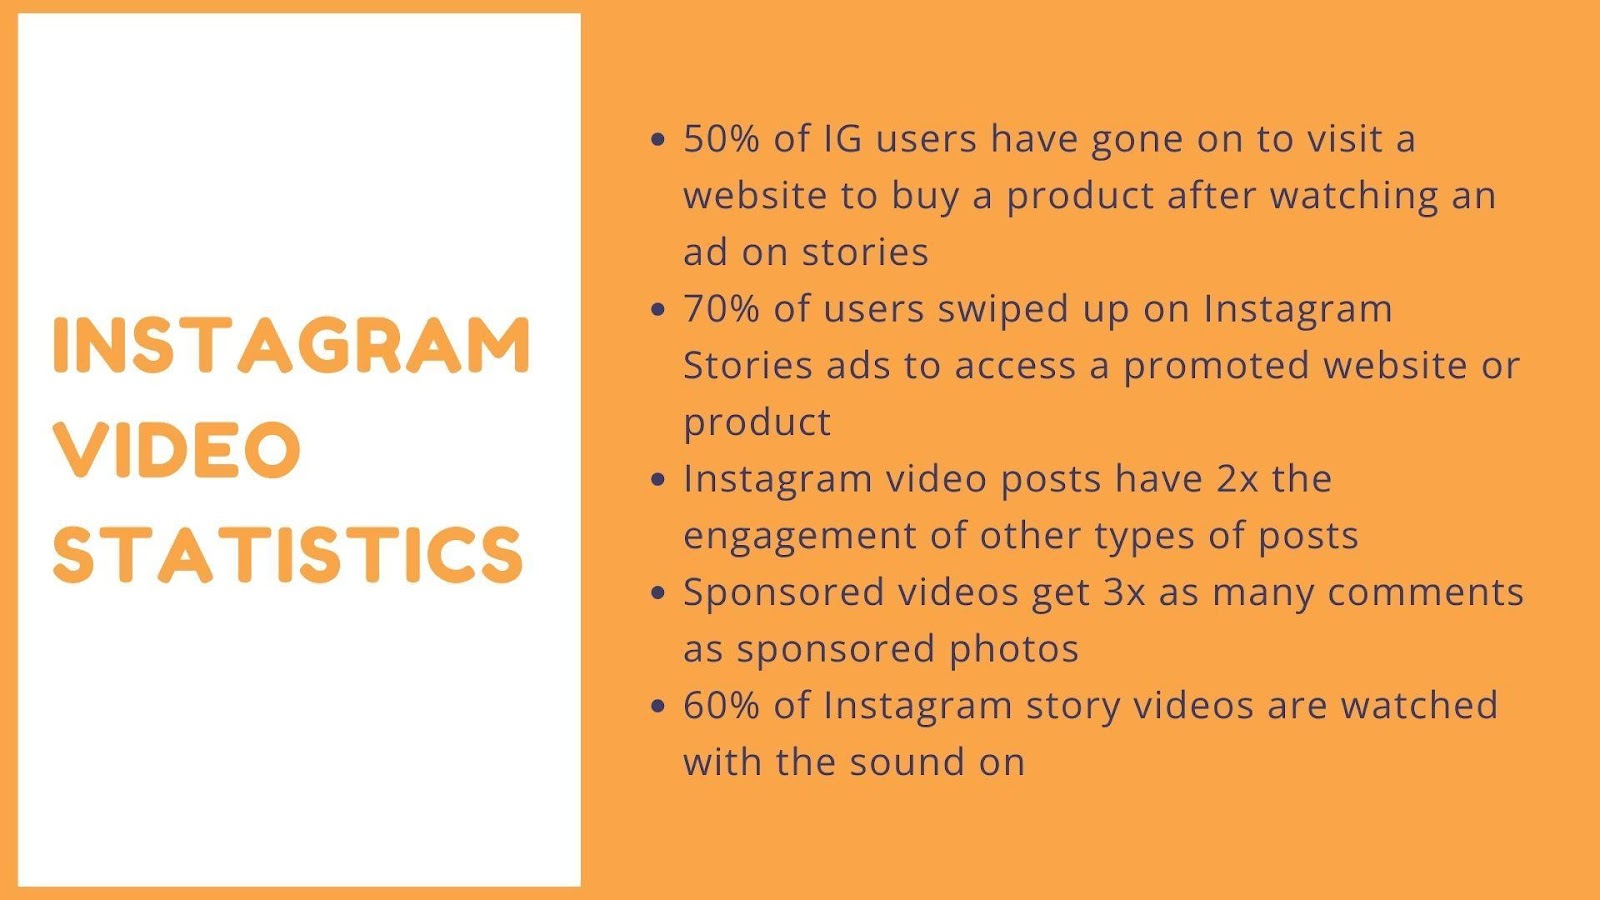 50% of IG users have gone on to visit a website to buy a product after watching an ad on stories, 70% of users swiped up on Instagram Stories ads to access a promoted website or product, Instagram video posts have 2x the engagement of other types of posts, Sponsored videos get 3x as many comments as sponsored photos, 60% of Instagram story videos are watched with the sound on